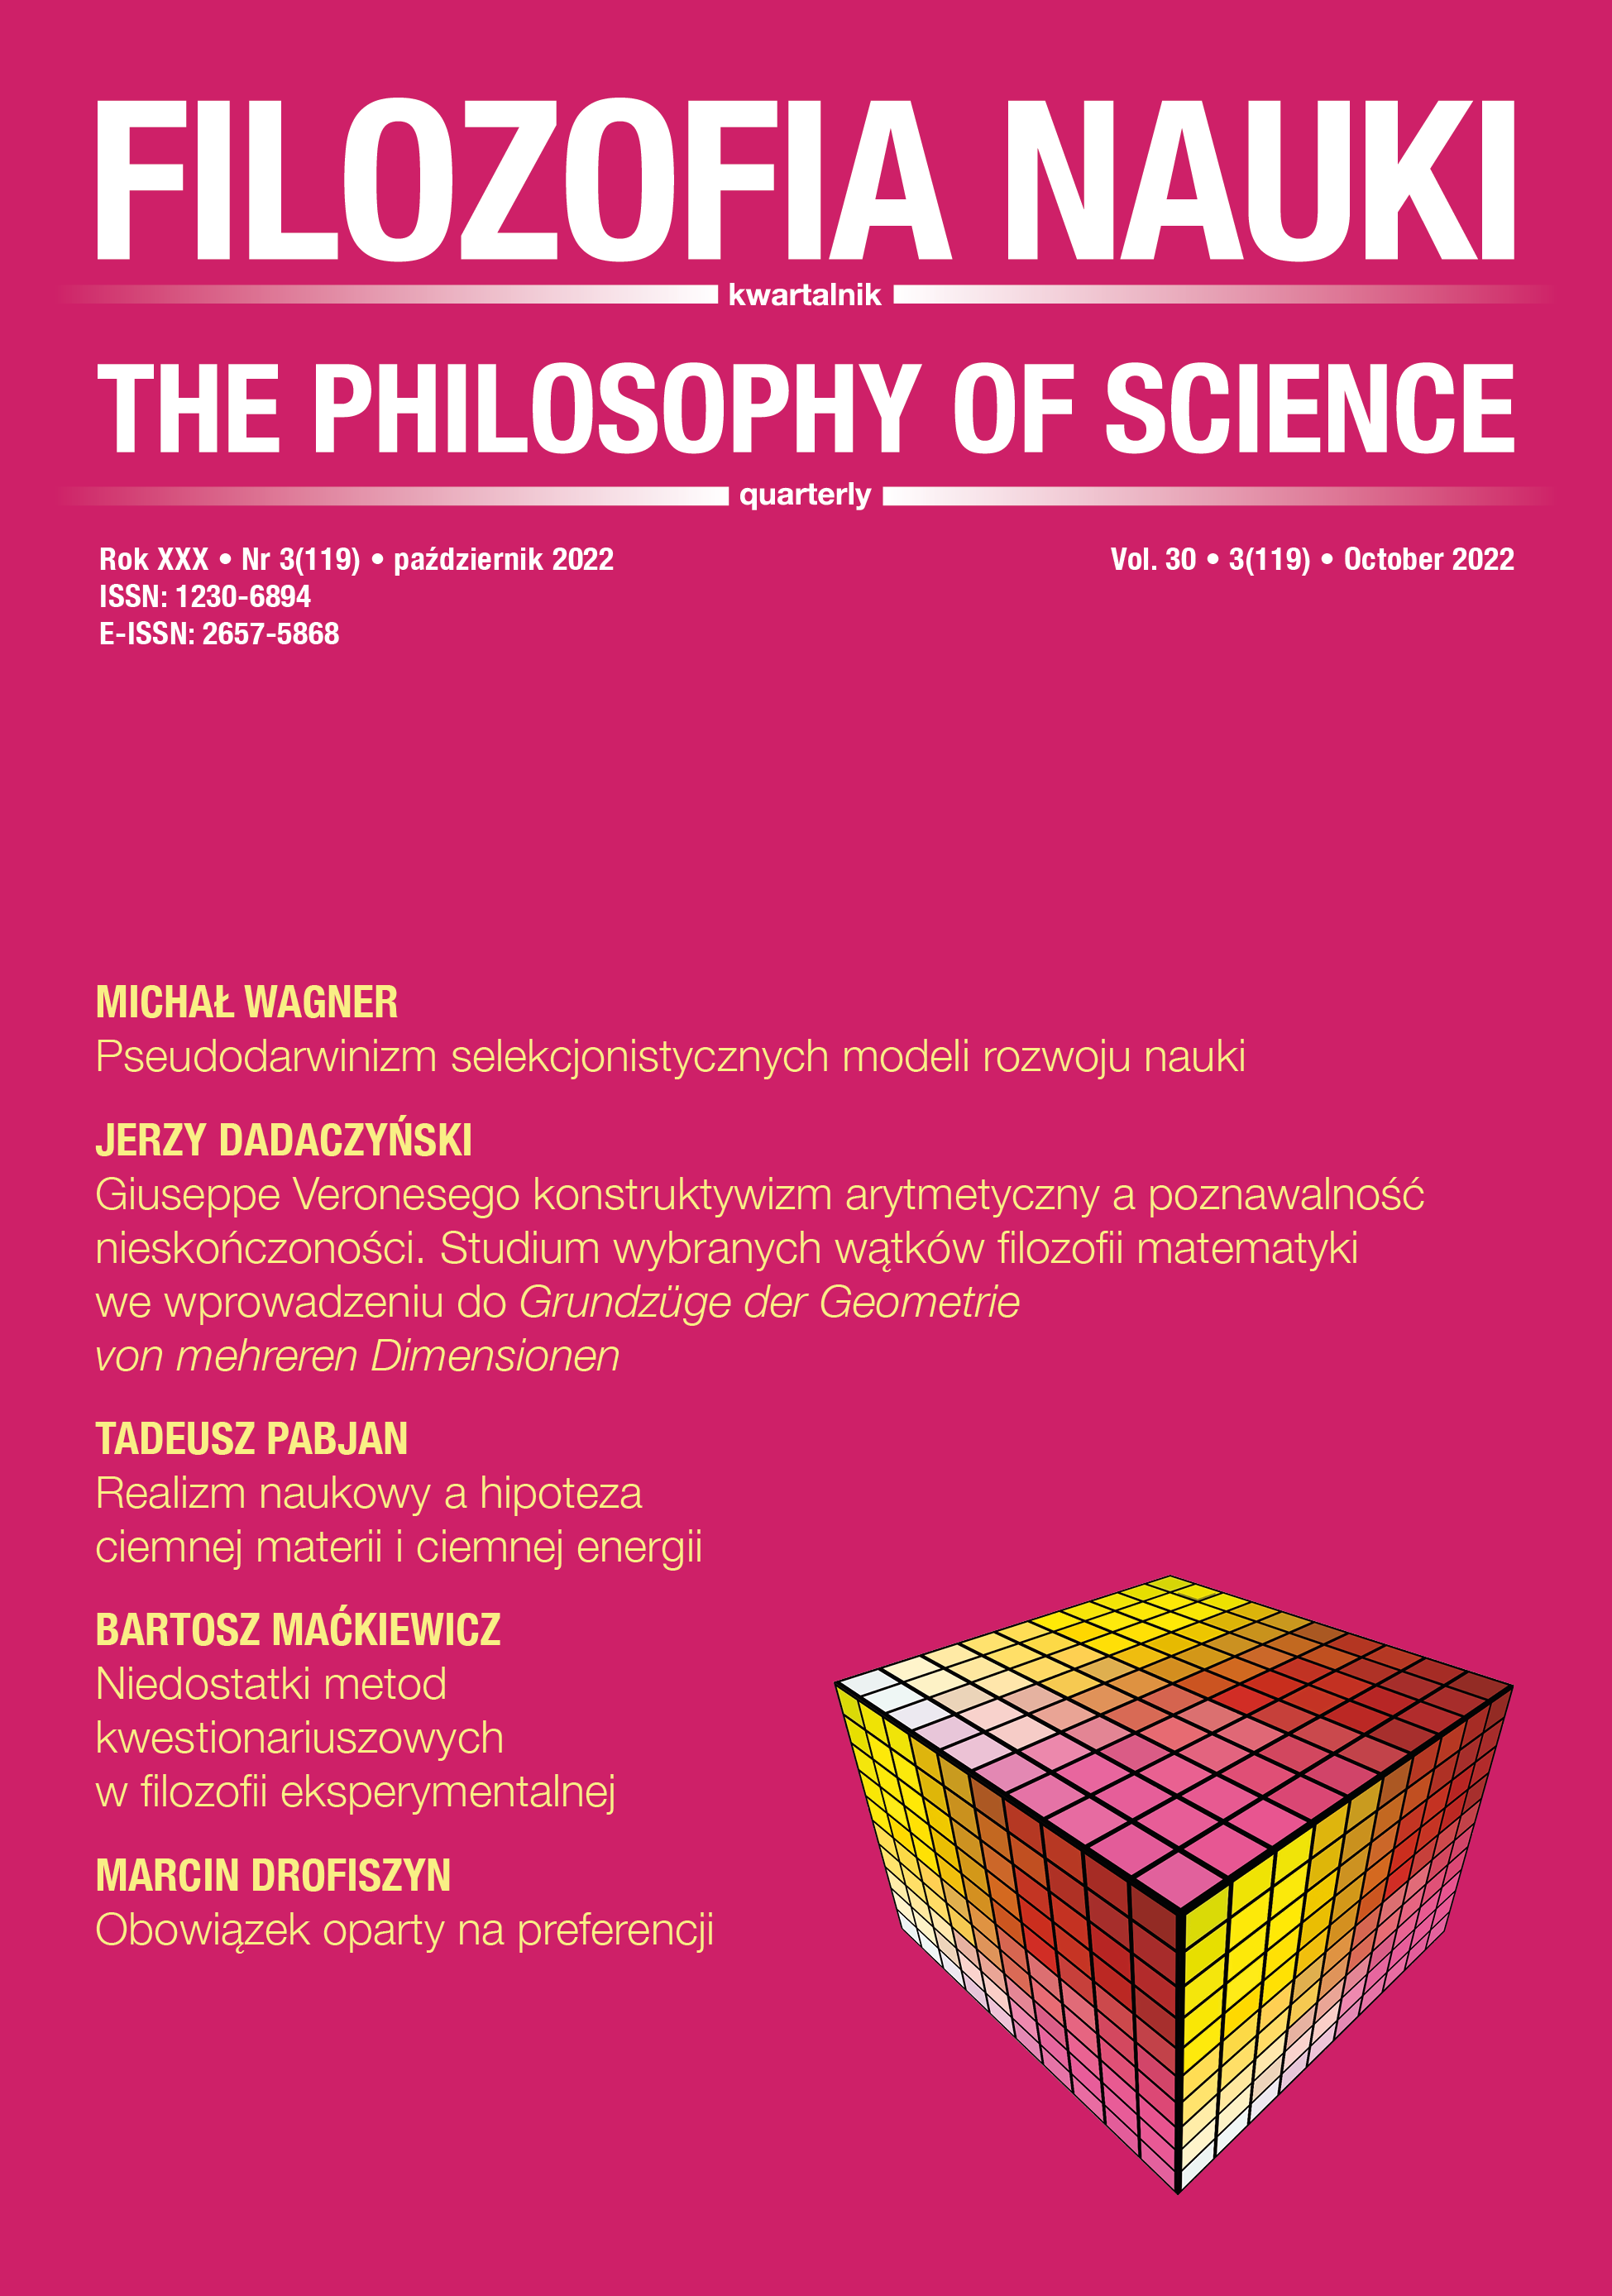 					View Vol. 30 No. 3 (2022): THE PHILOSOPHY OF SCIENCE
				